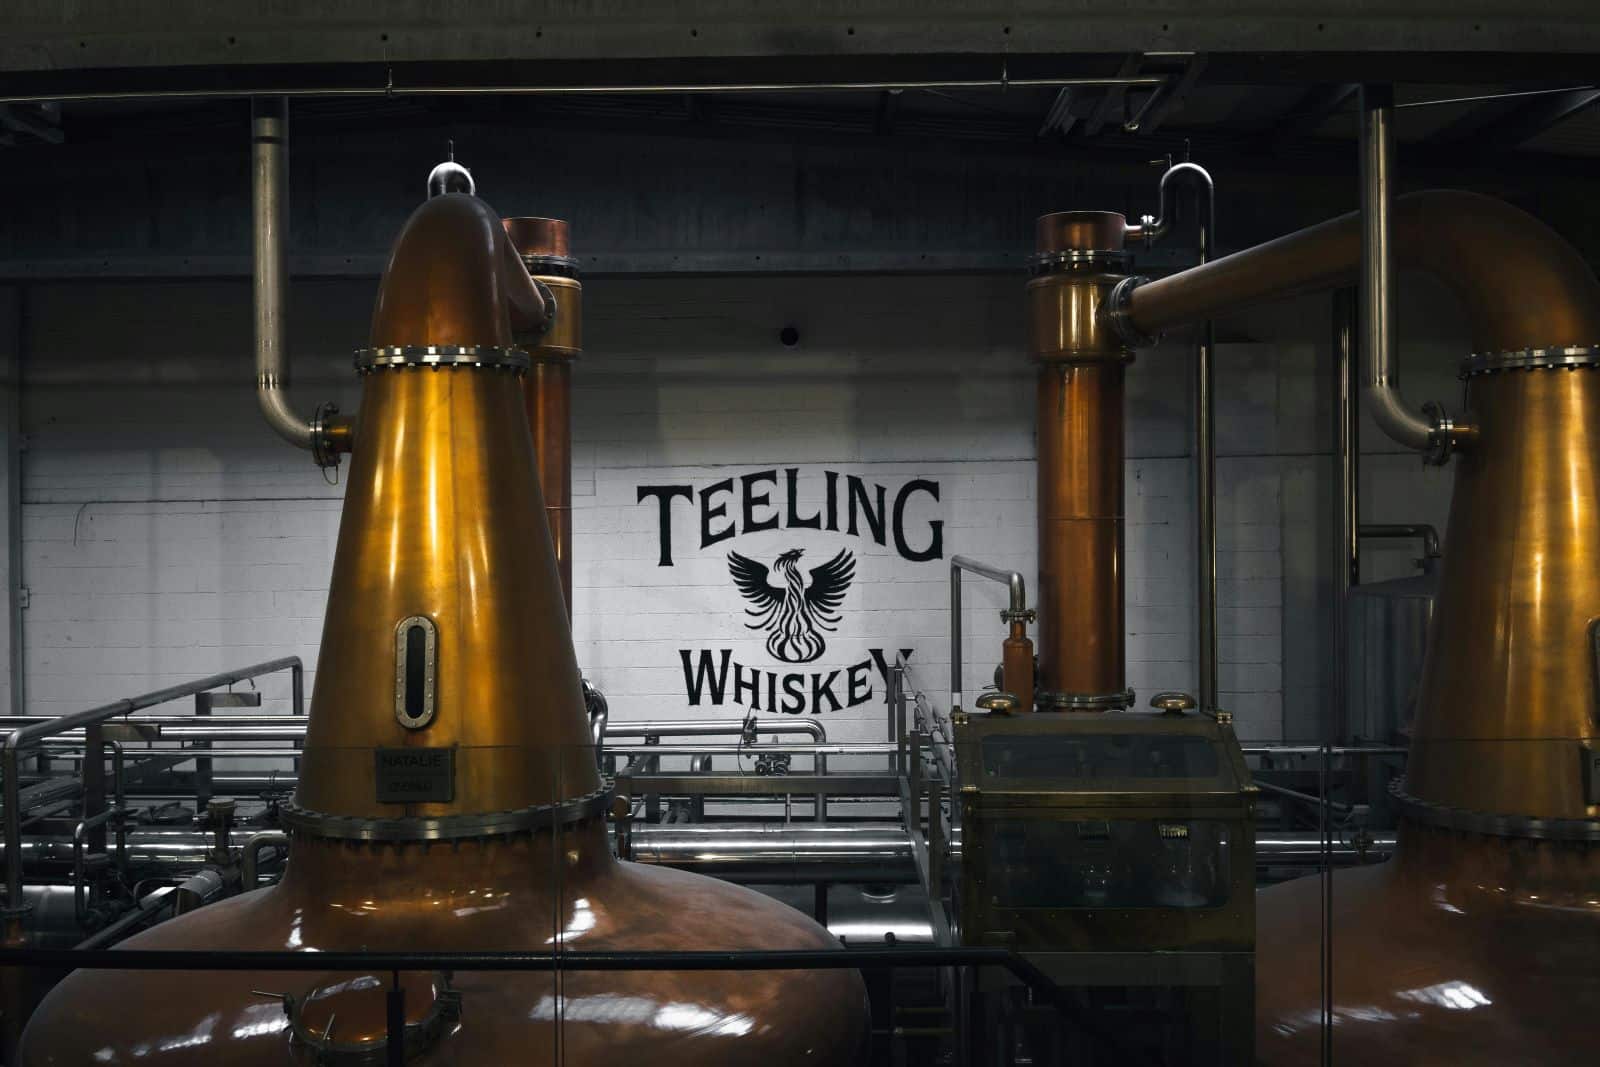 <p class="wp-caption-text">Image Credit: Pexels / Szabolcs Toth</p>  <p><span>Experience the Irish whiskey renaissance firsthand in Dublin, with visits to the Jameson Distillery and the Teeling Distillery, which is revitalizing the city’s historic distilling district.</span></p>